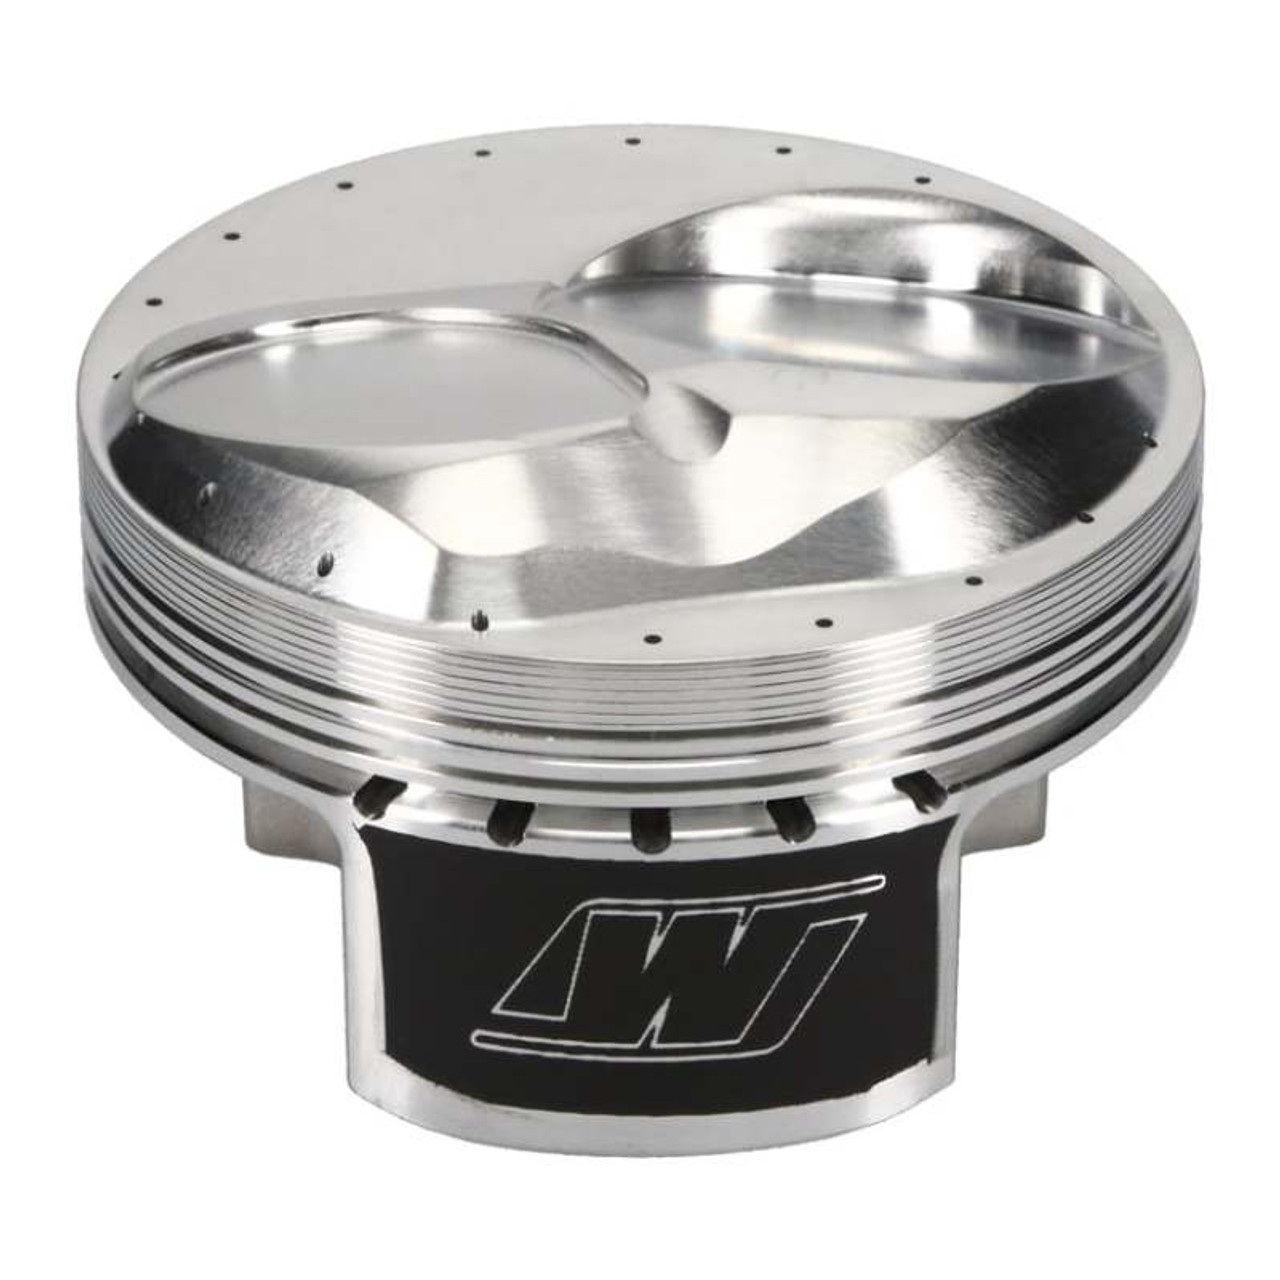 Wiseco Chevrolet Big Blox Brodix SR20 4.600in Bore 1.060in CH 0.990in H Piston Shelf Stock Kit - K0160B100 Photo - out of package